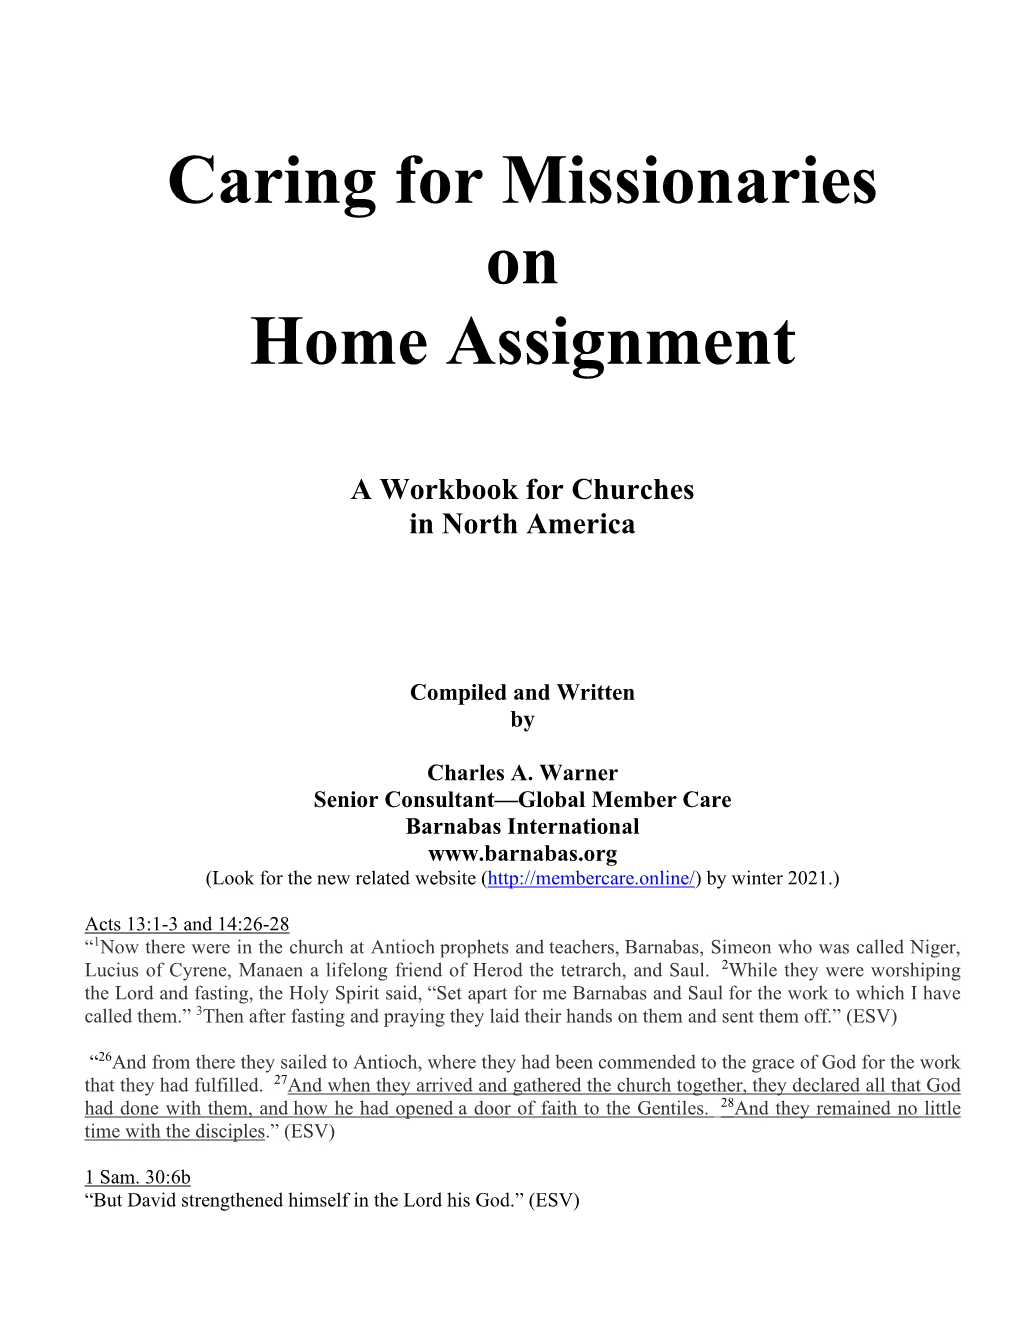 Caring for Missionaries on Home Assignment